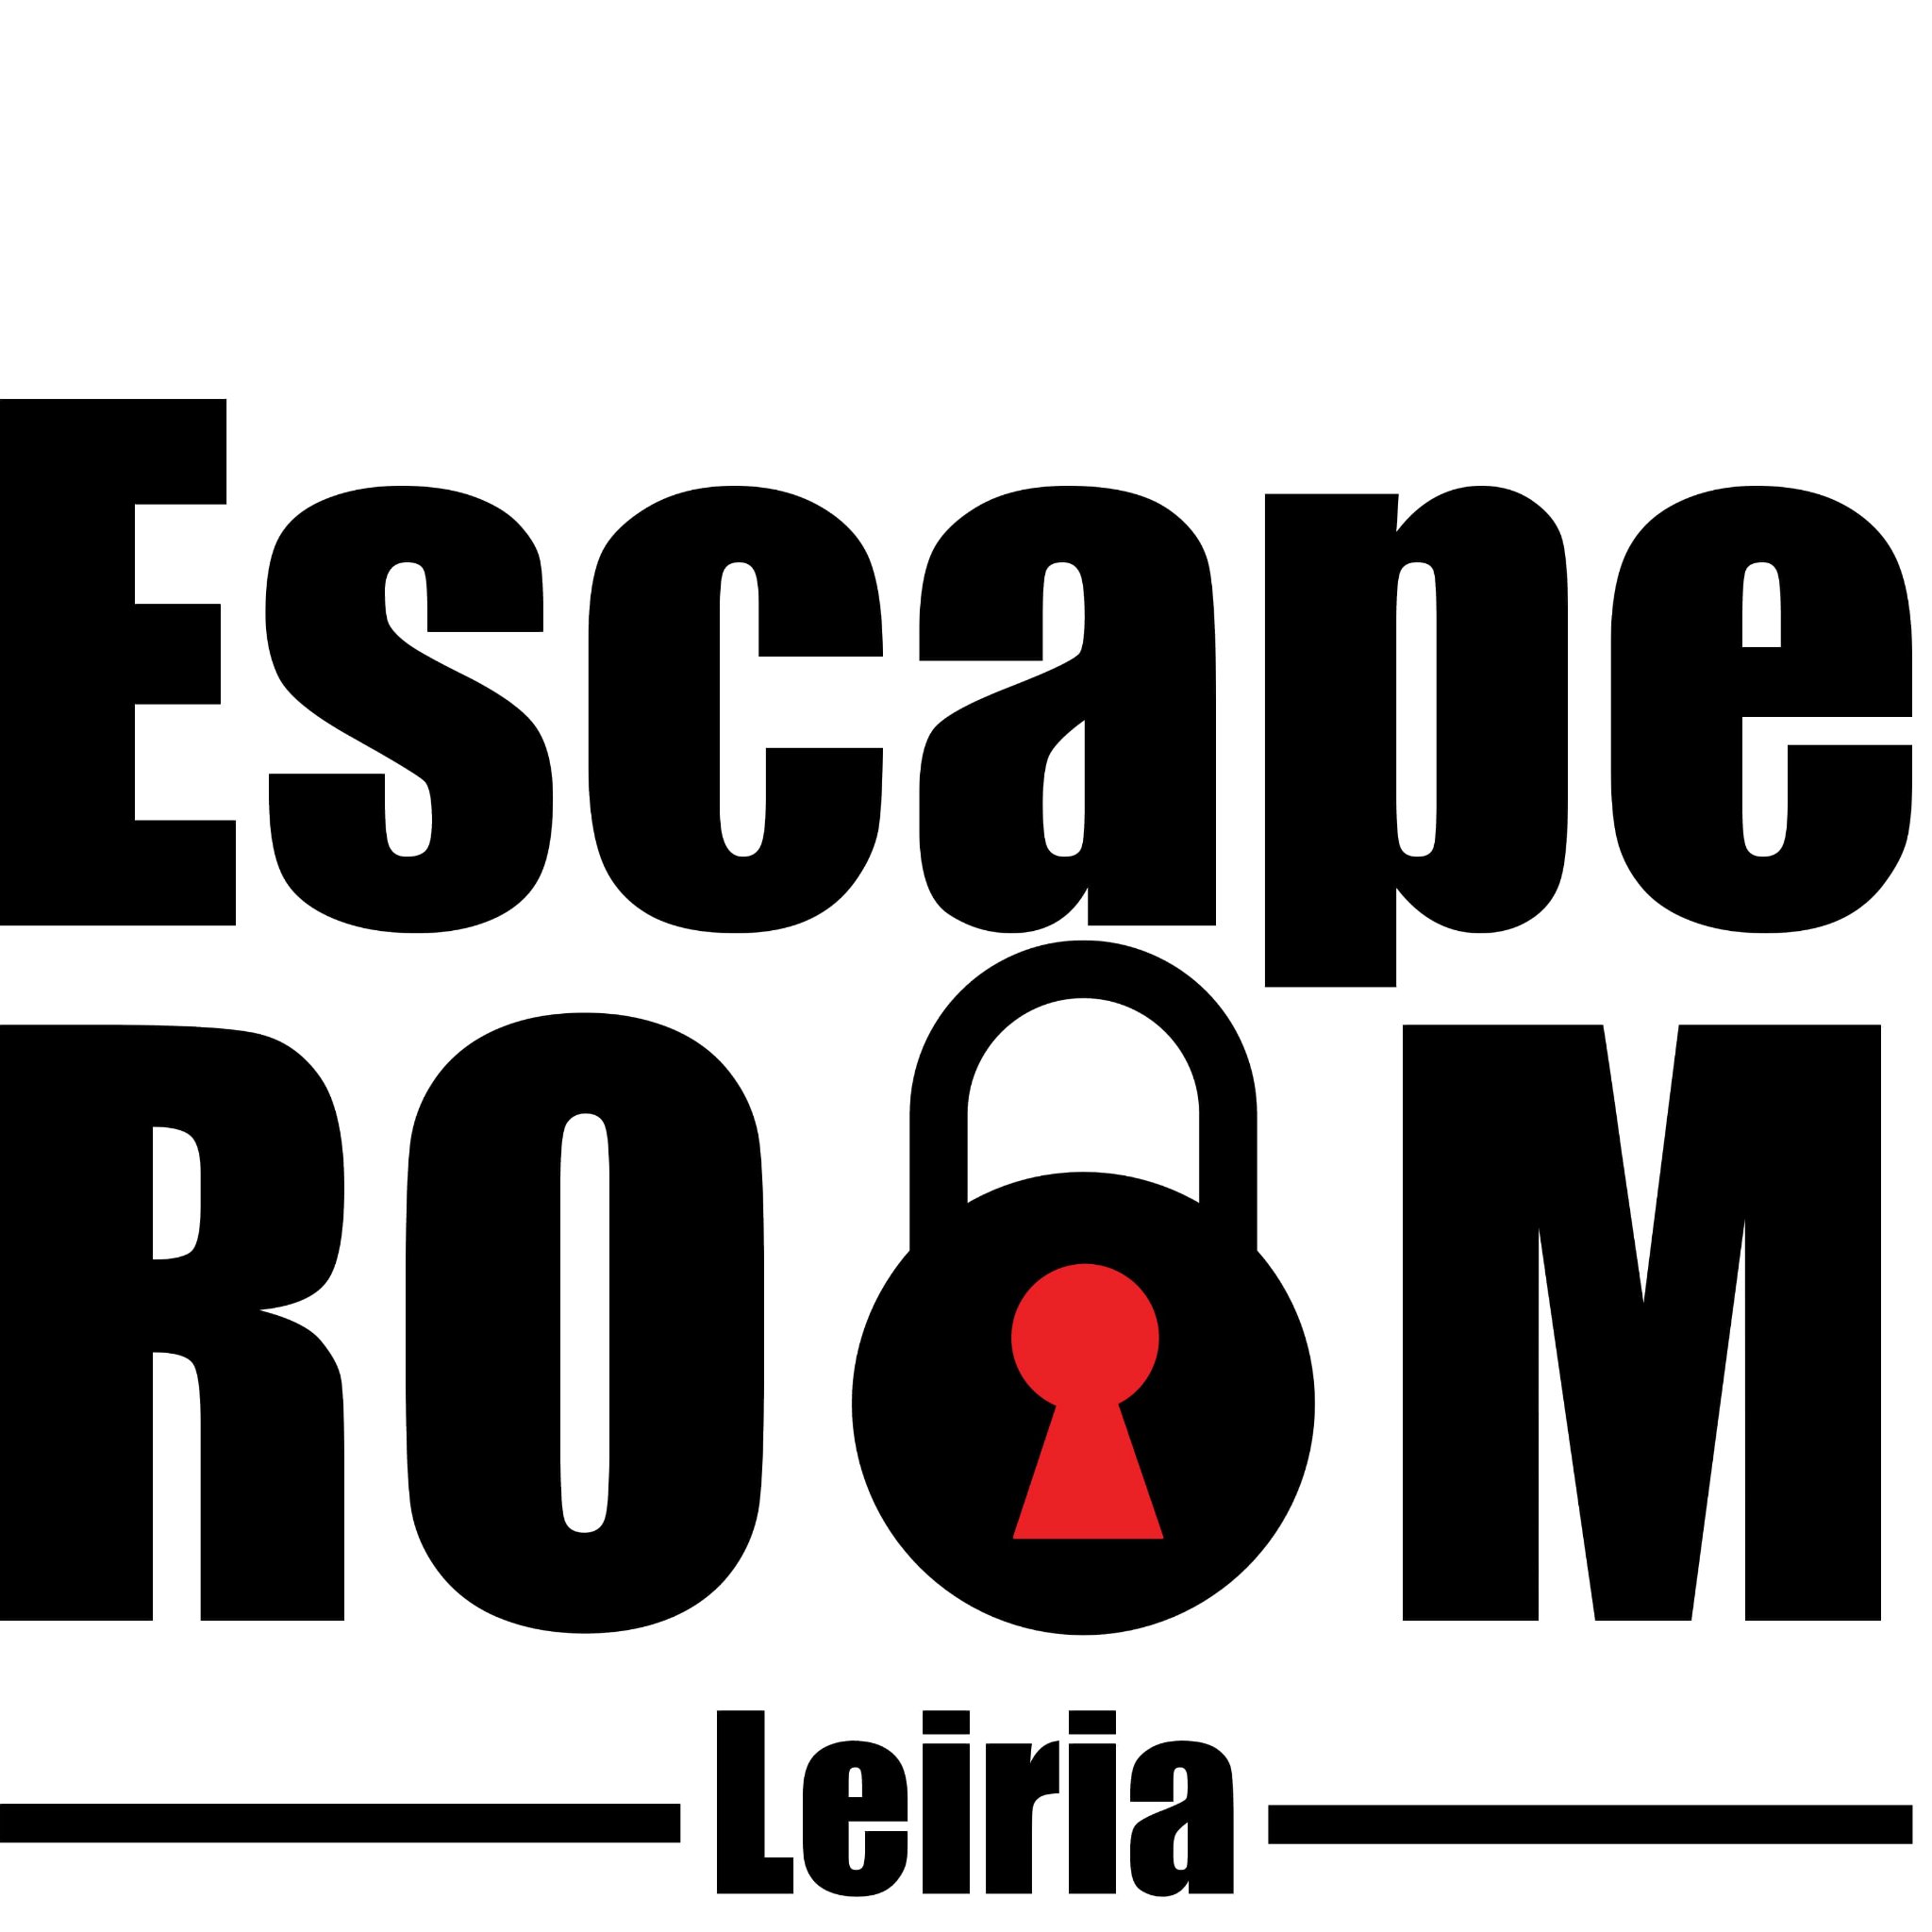 An other ordinary room... Or is it? Find hidden objects, figure out the clues and solve the puzzles to earn your freedom and “Escape the Room.”